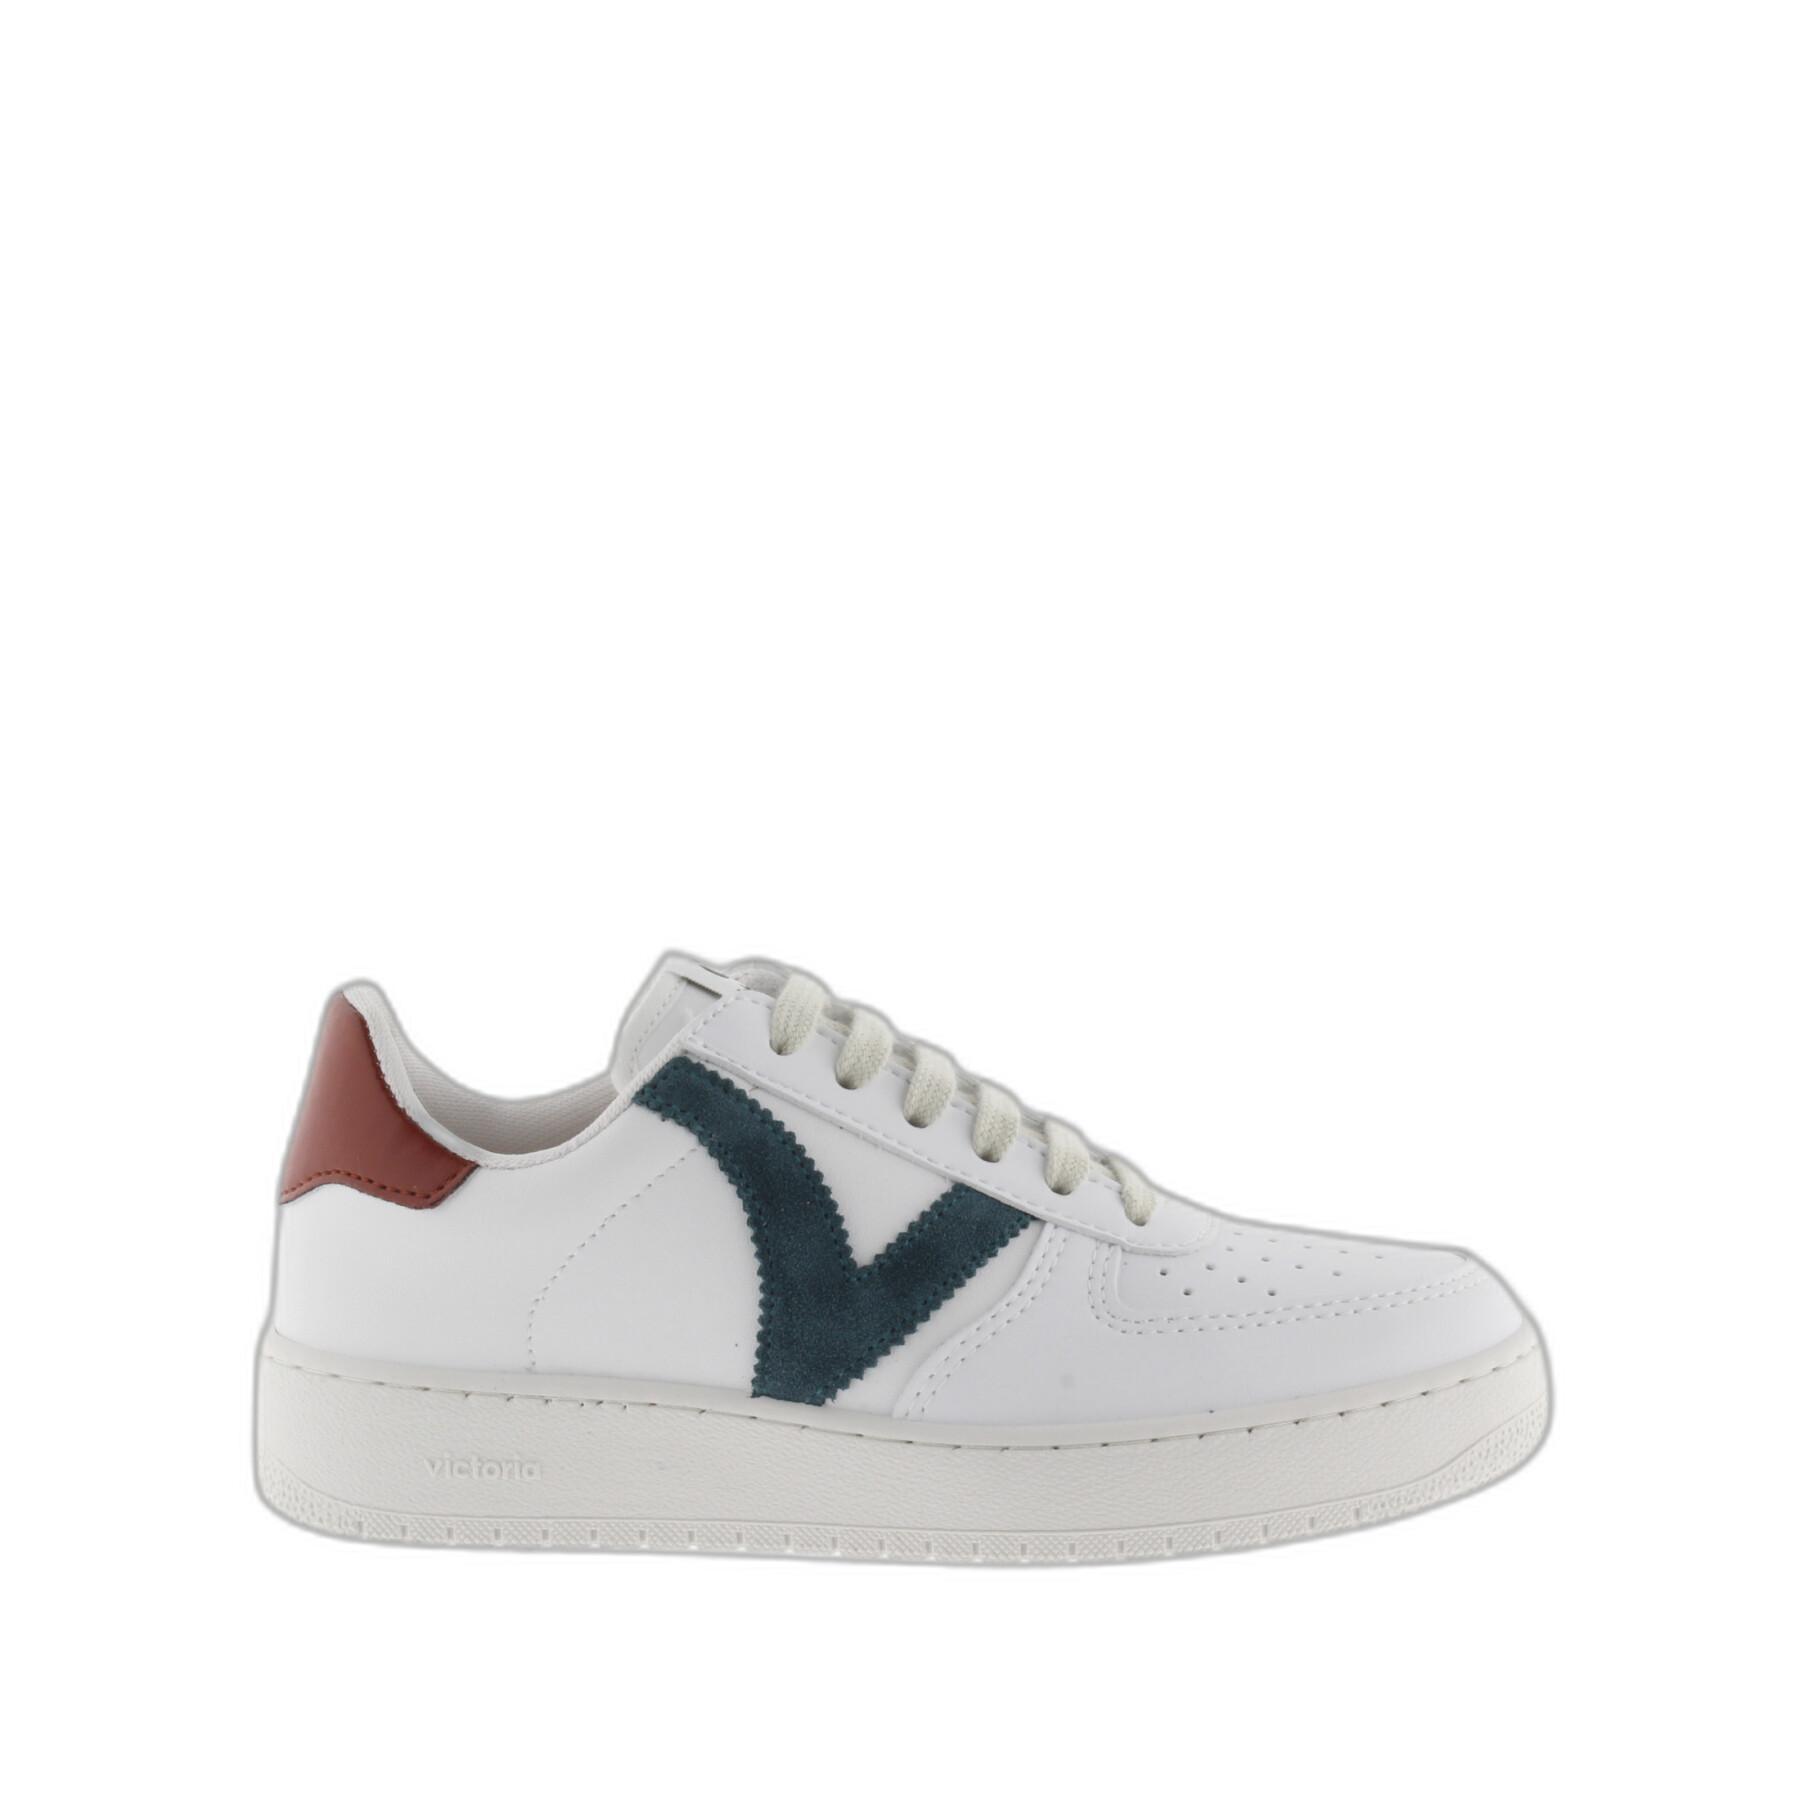 Women's contrast leather effect sneakers Victoria Madrid